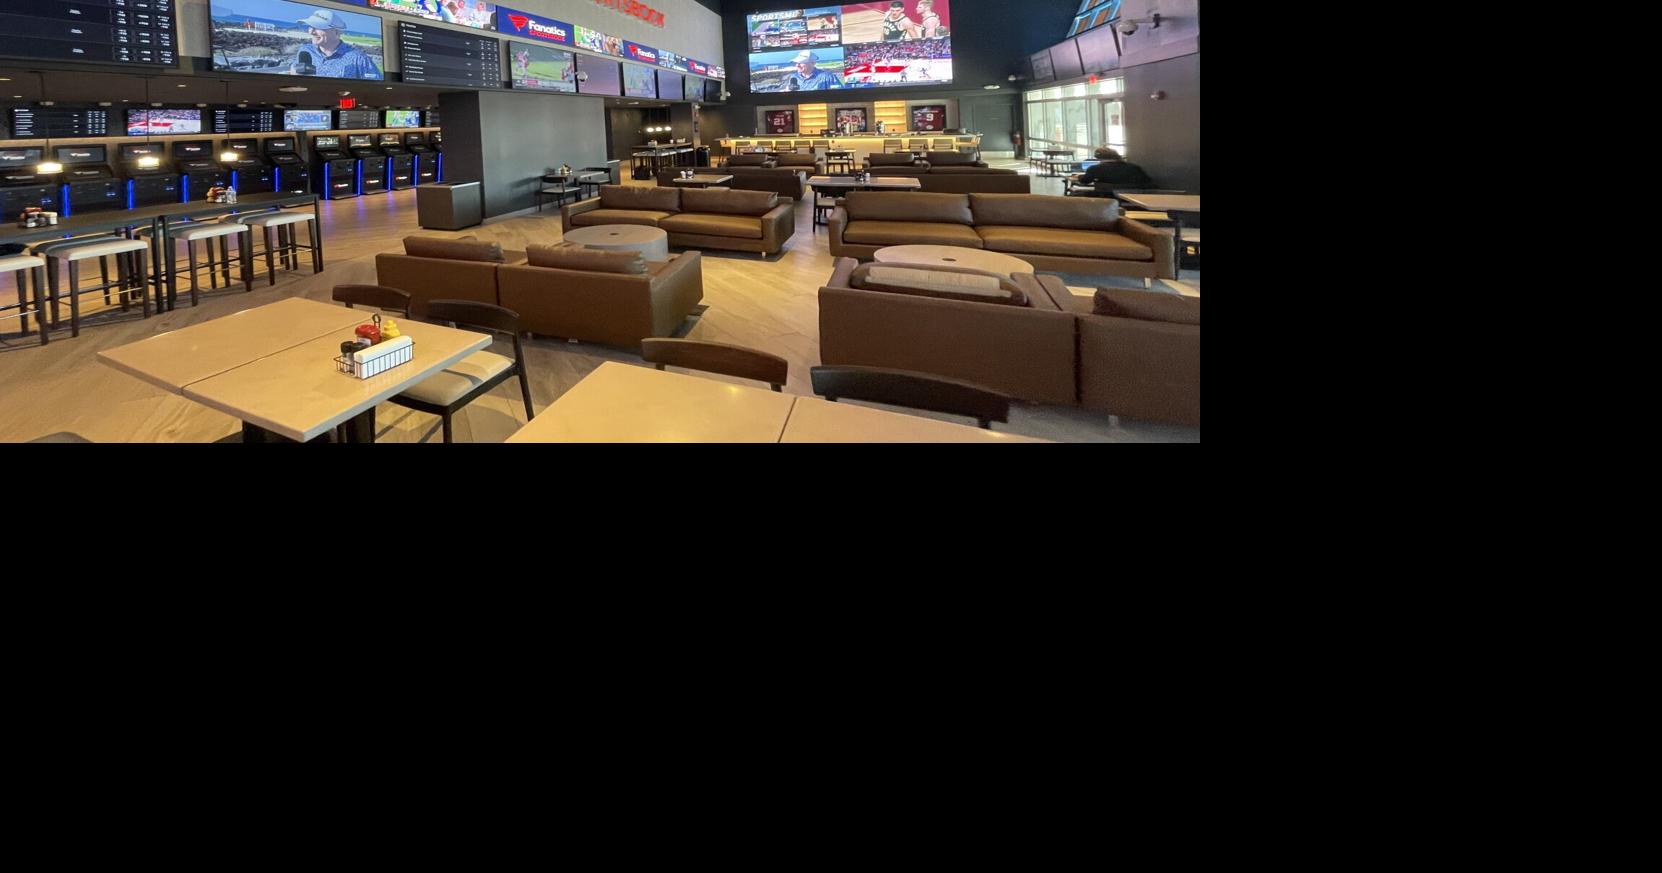 Fanatics Sportsbook Officially Launches with Retail Location in Maryland —  Fanatics Inc